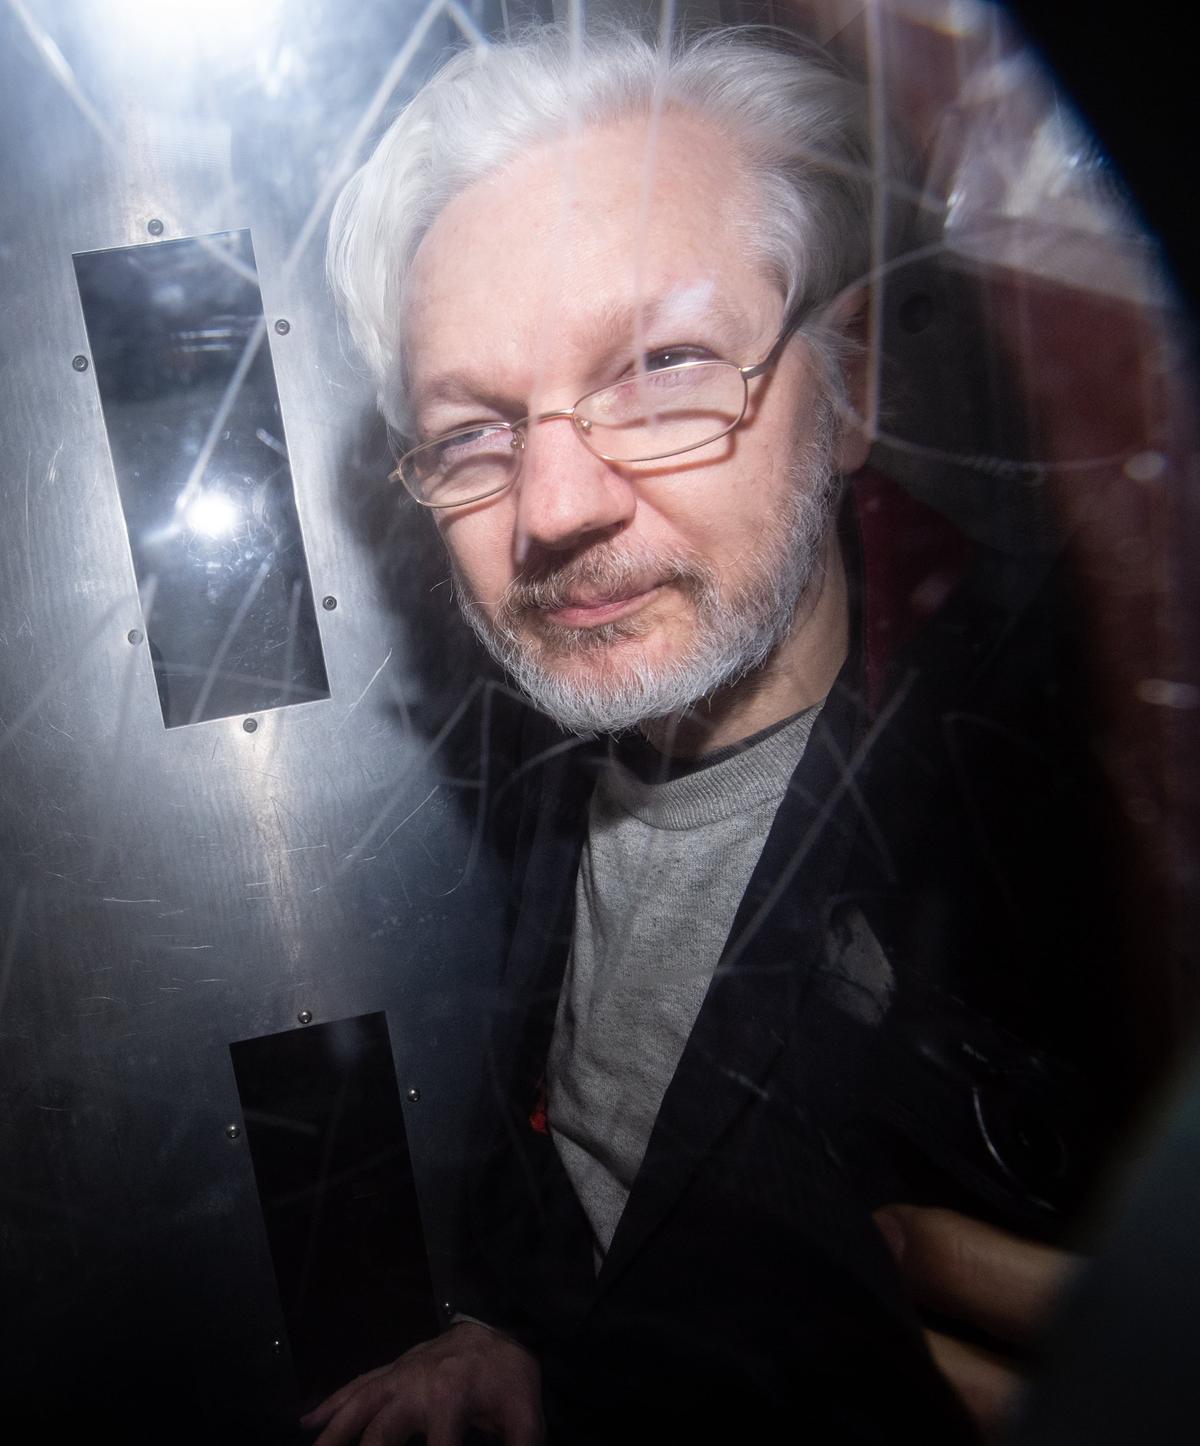 Australian PM Refuses to Publicly Intervene in Julian Assange's Extradition to the US